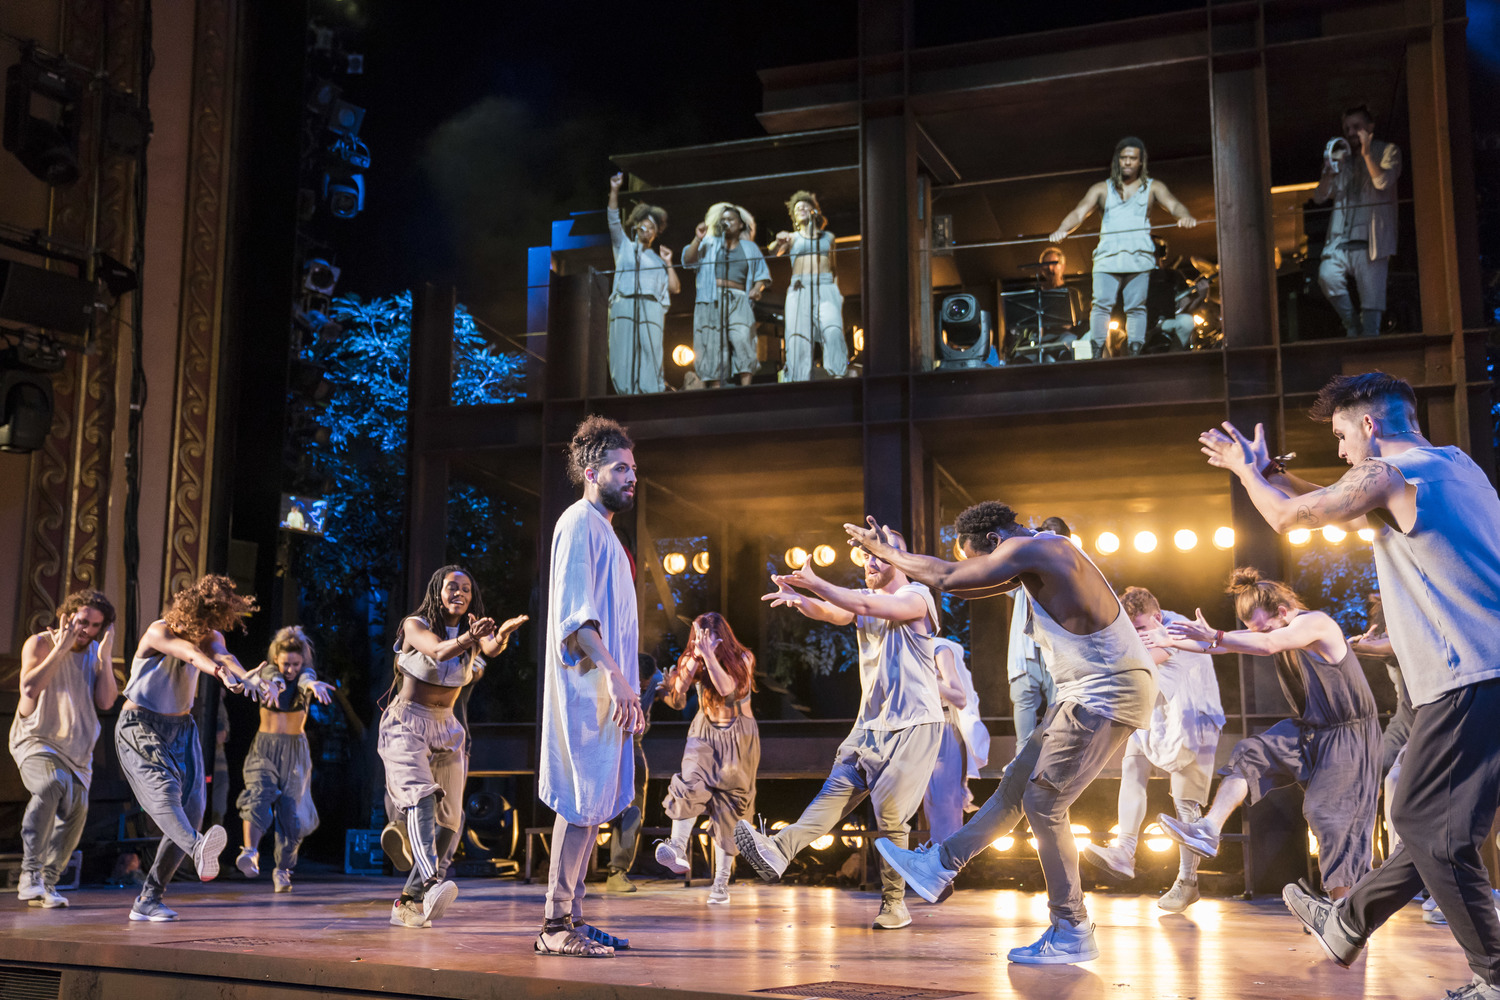 Regional Roundup: Top New Features This Week Around Our BroadwayWorld 5/4 - JESUS CHRIST SUPERSTAR, RAGTIME, and More! 